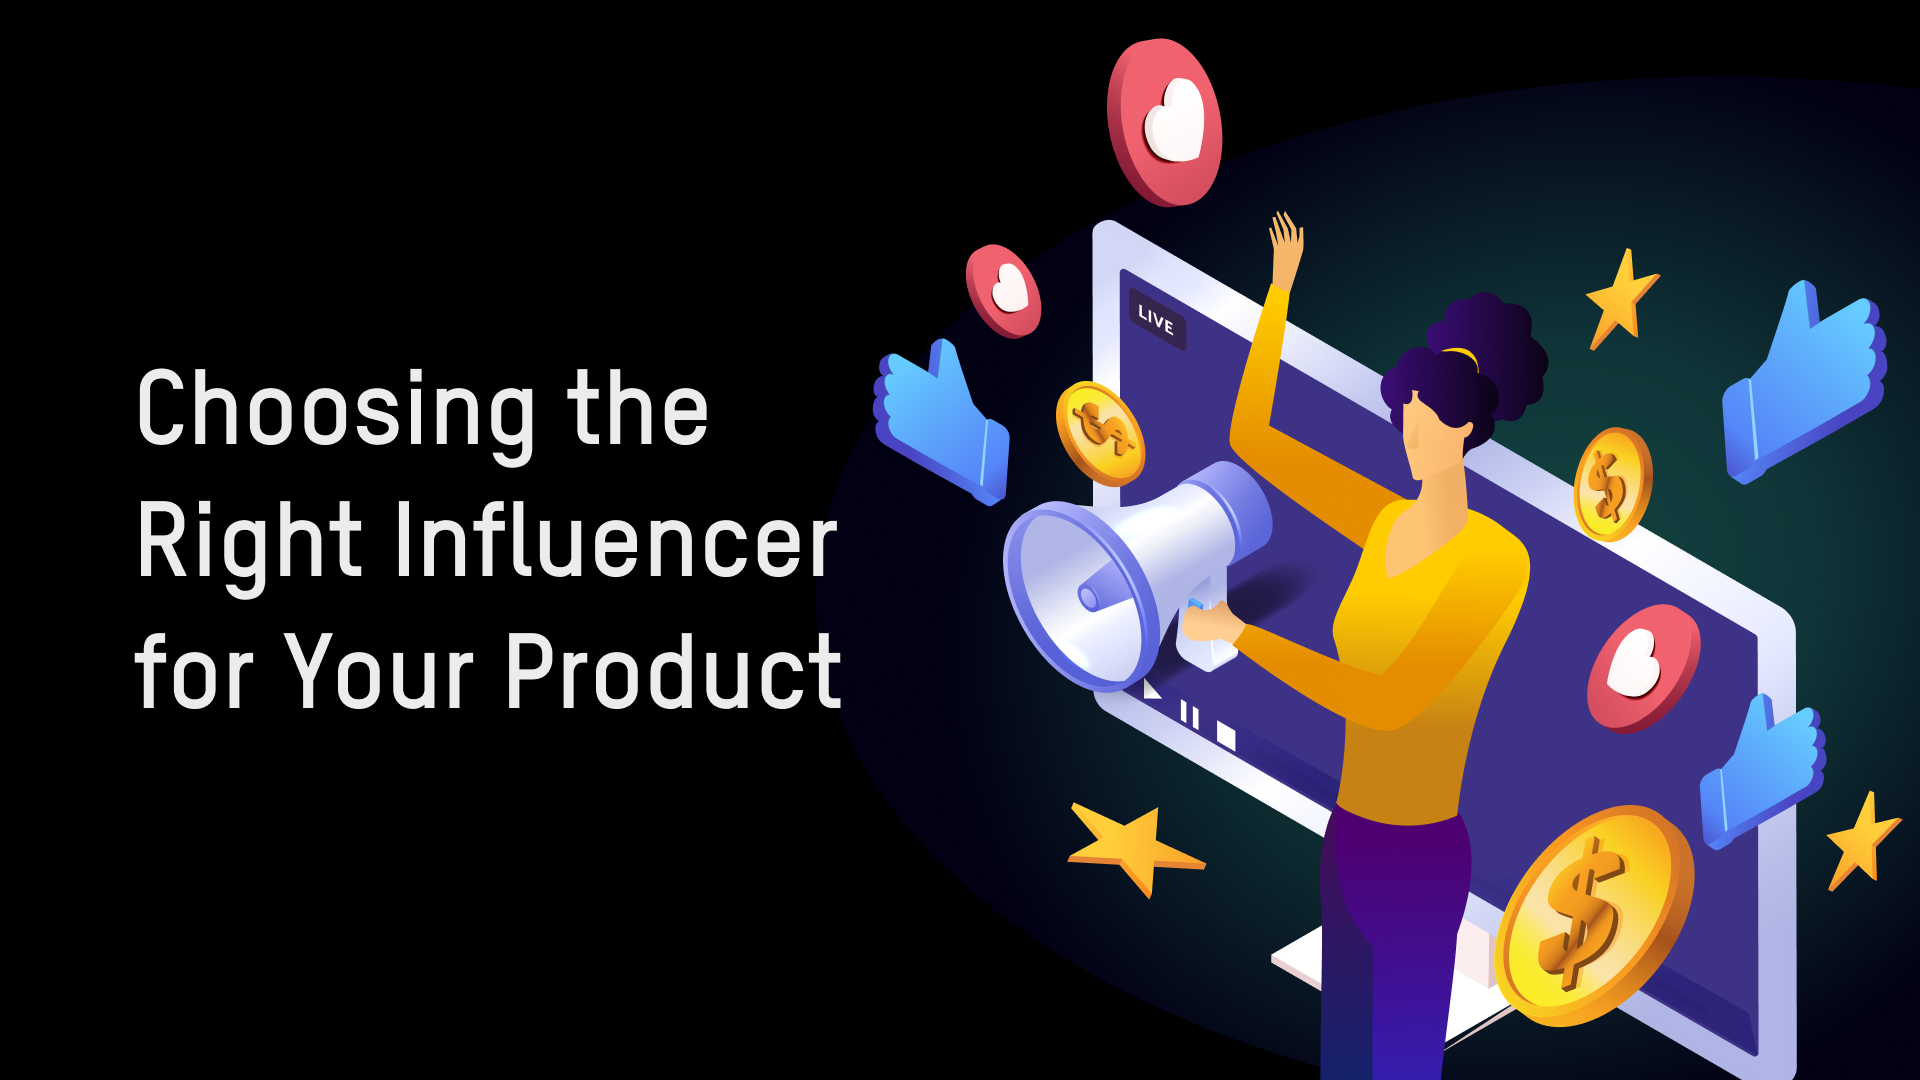 Choosing the Right Influencer for Your Product